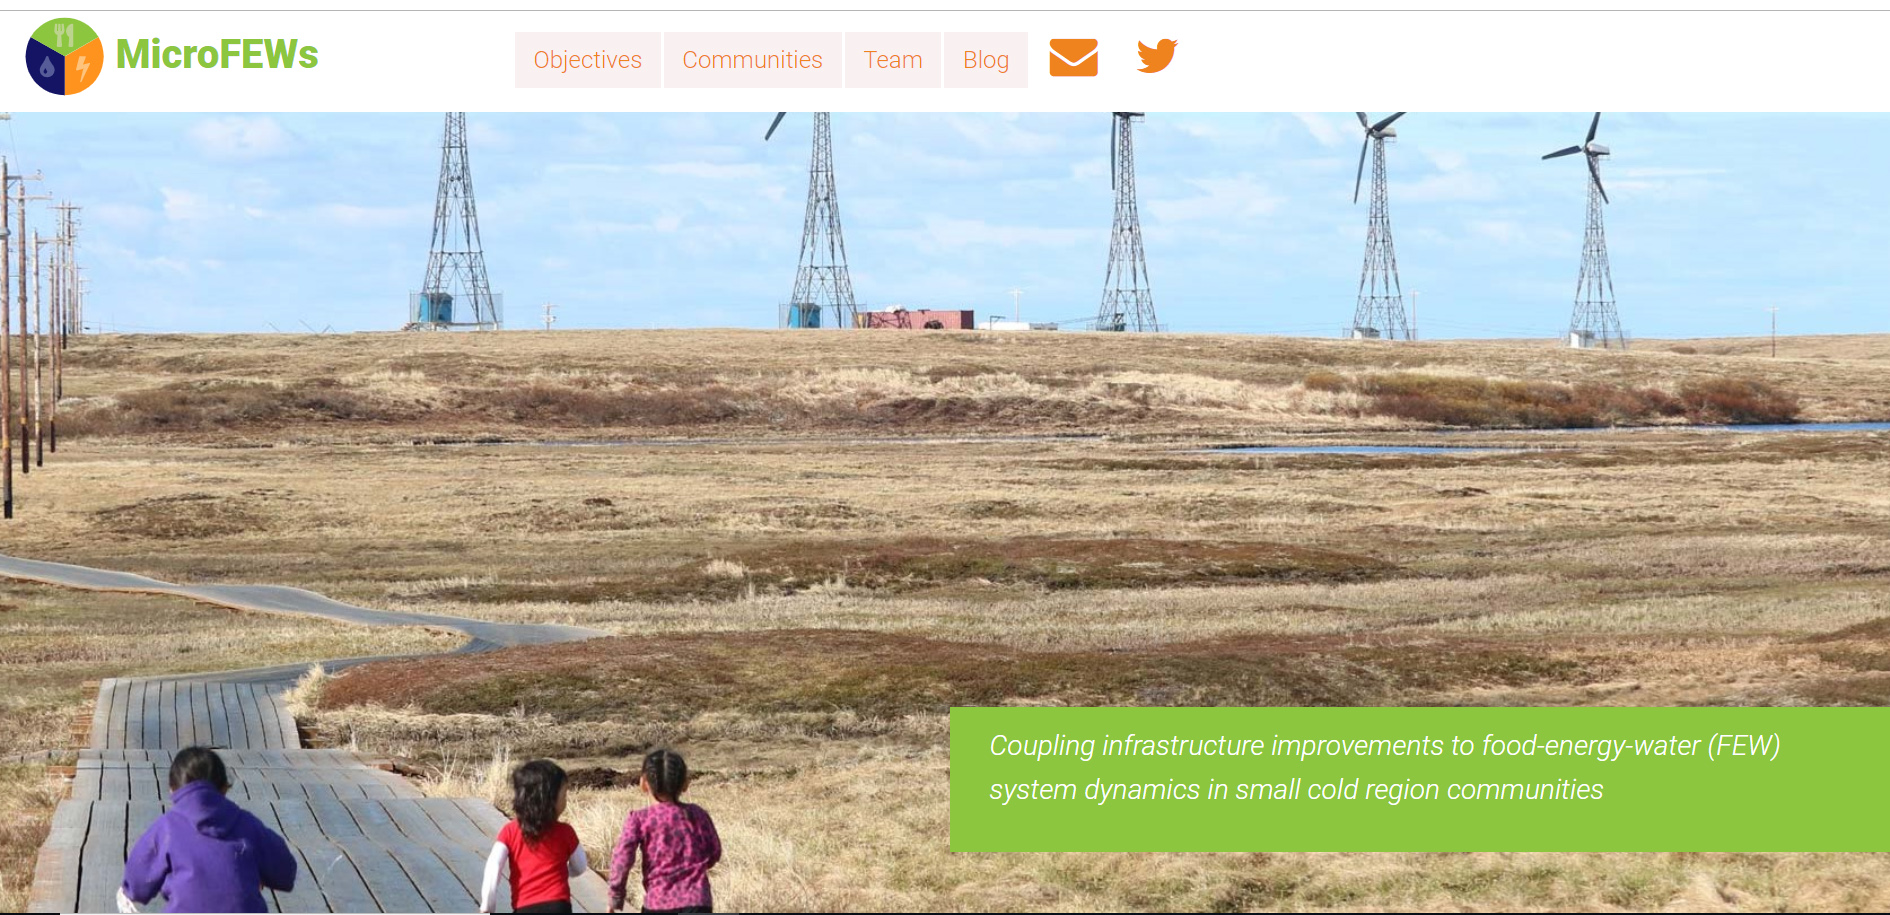 New Website Details Food, Energy and Water Research in Alaska Communities